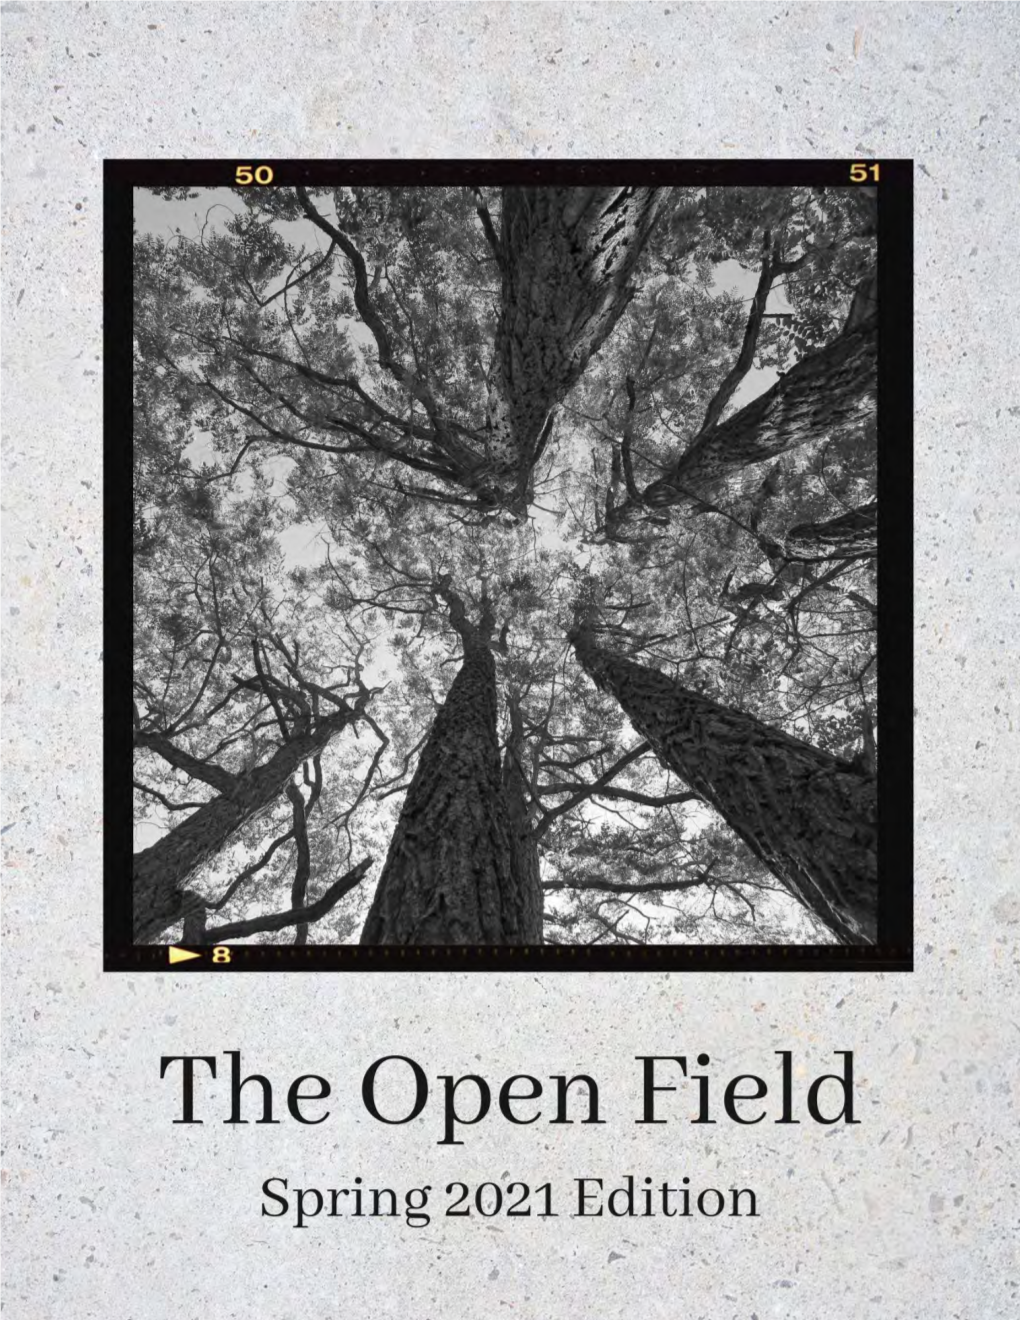 The Open Field Spring 2021 Edition